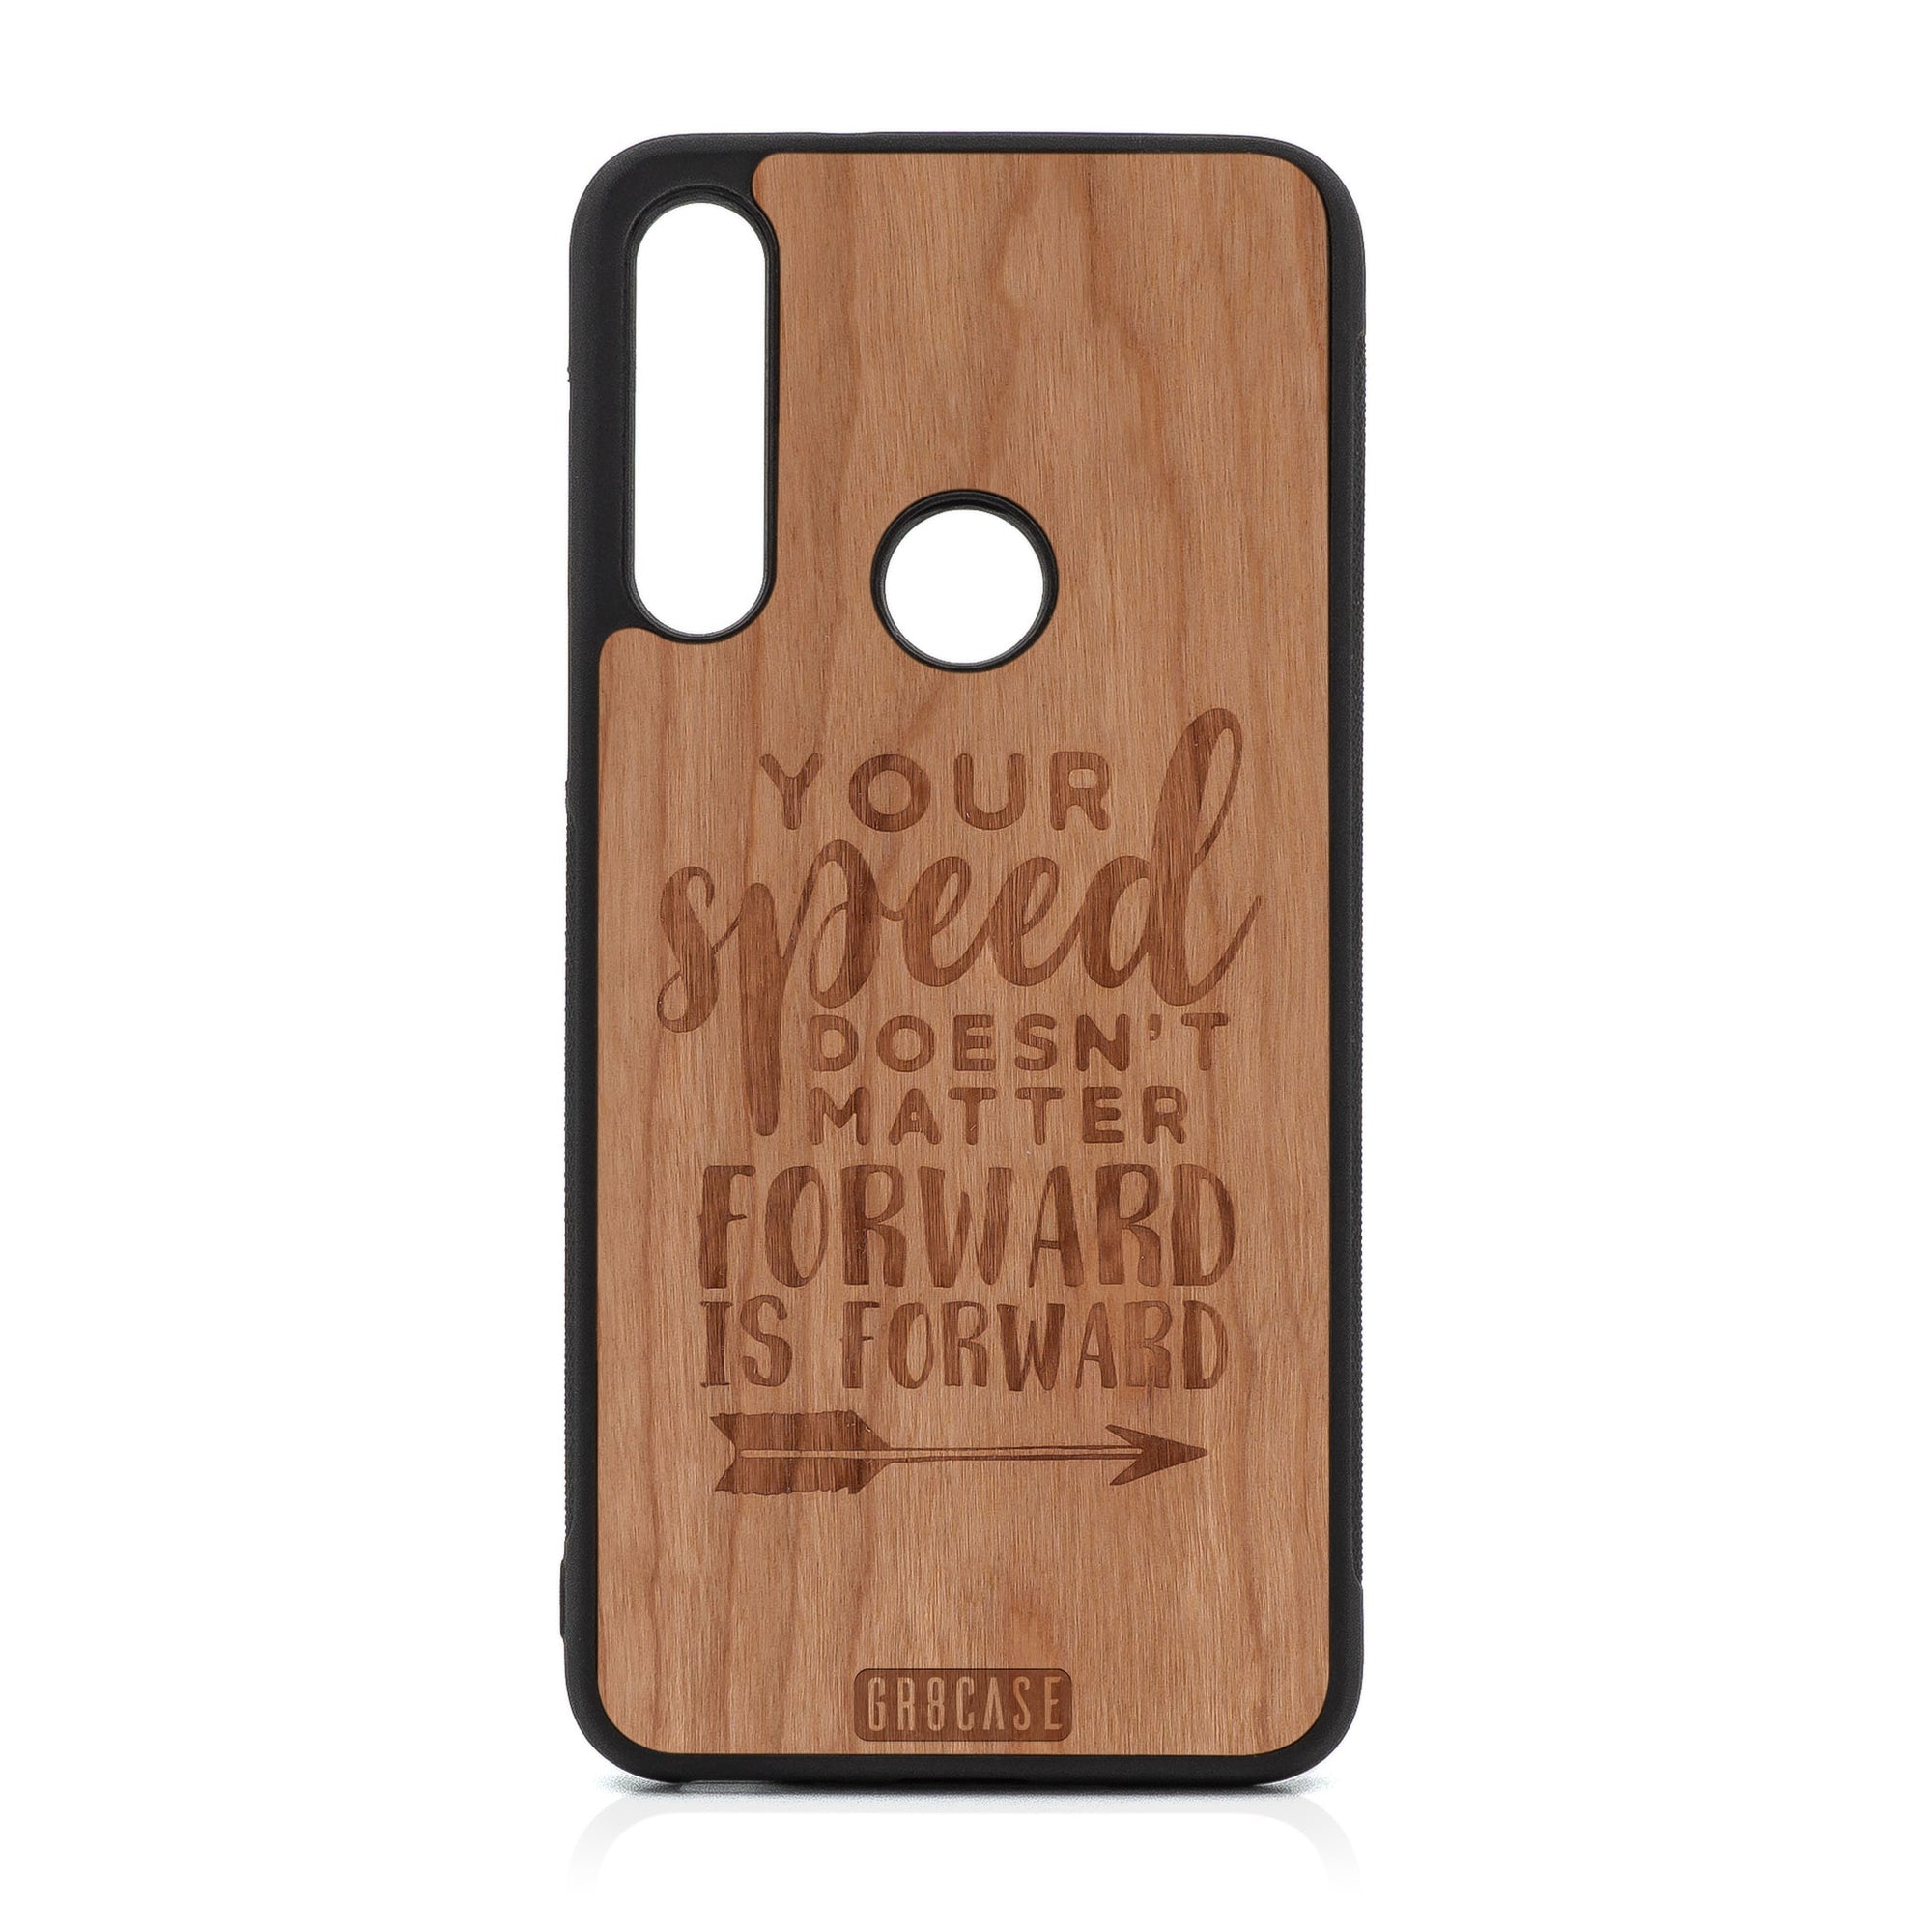 Your Speed Doesn't Matter Forward Is Forward Design Wood Case For Moto G Fast